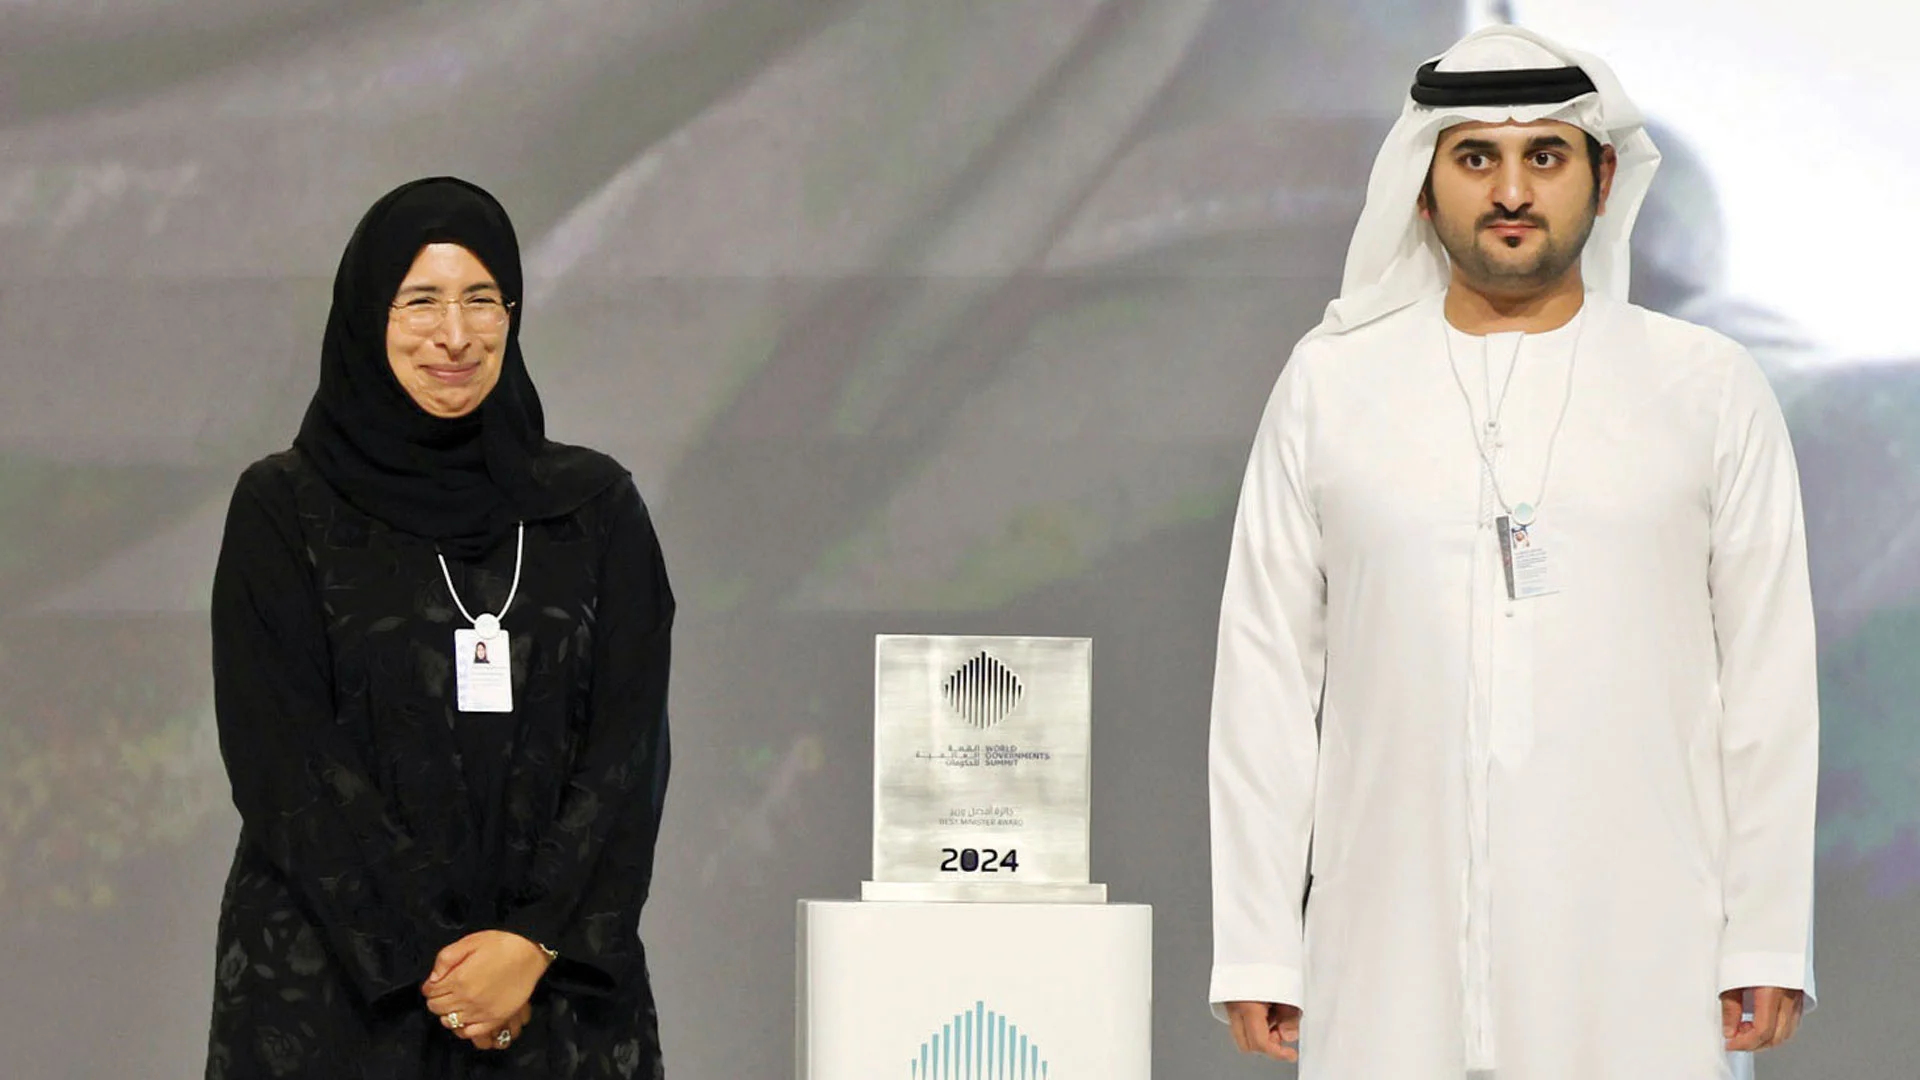 Qatari Minister Honored with 'Best Minister Award' at World Governments Summit in Dubai